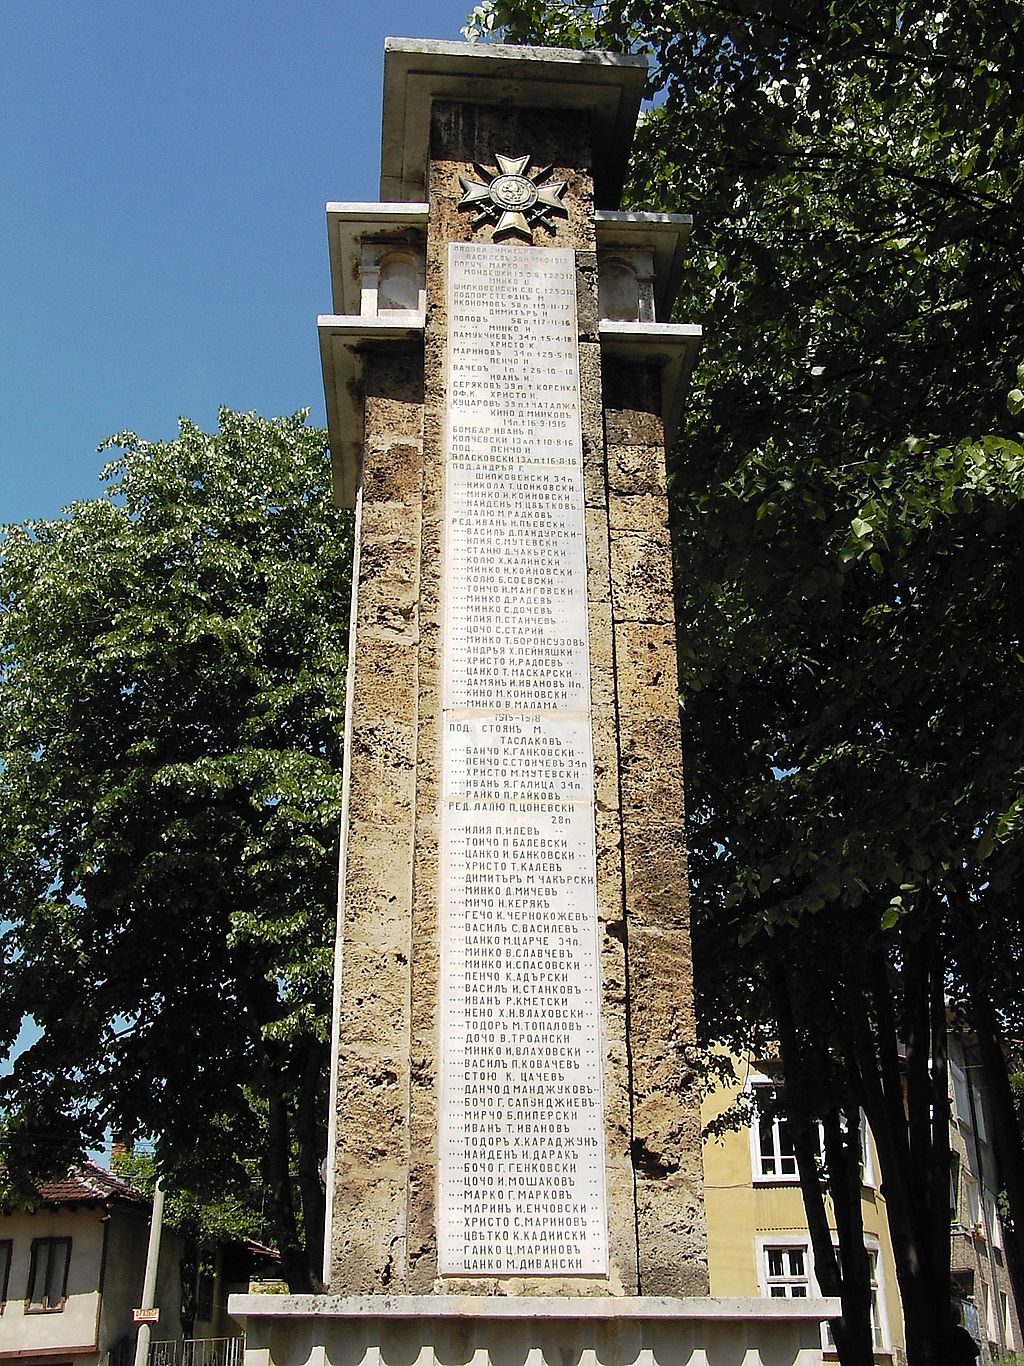 Monument of the Fallen in the Wars from 1912-1913, 1915-1918 and 1941-1945, Troyan